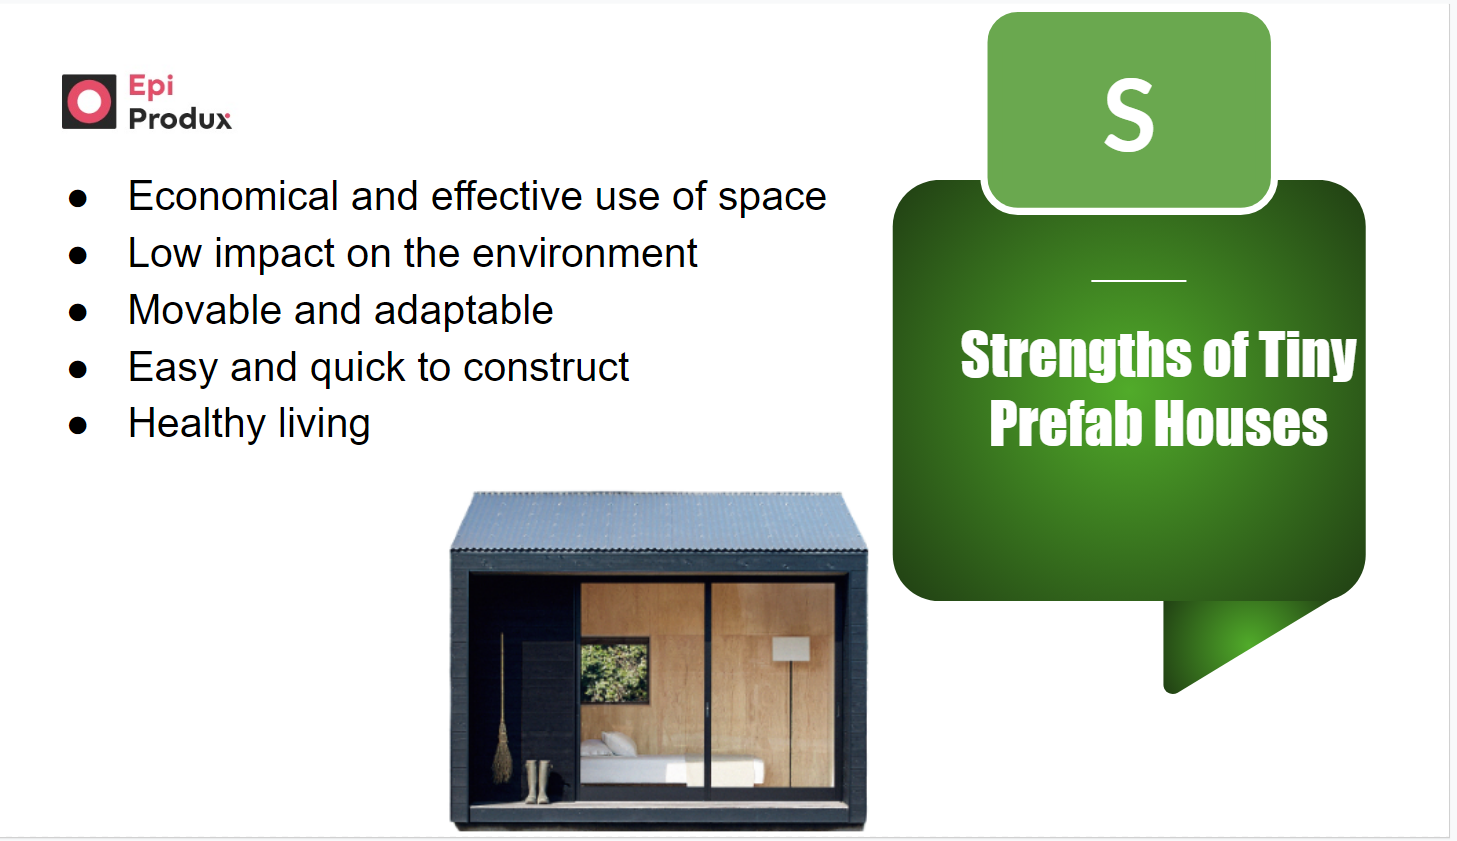 Strengths of tiny prefab houses for mindfulness.